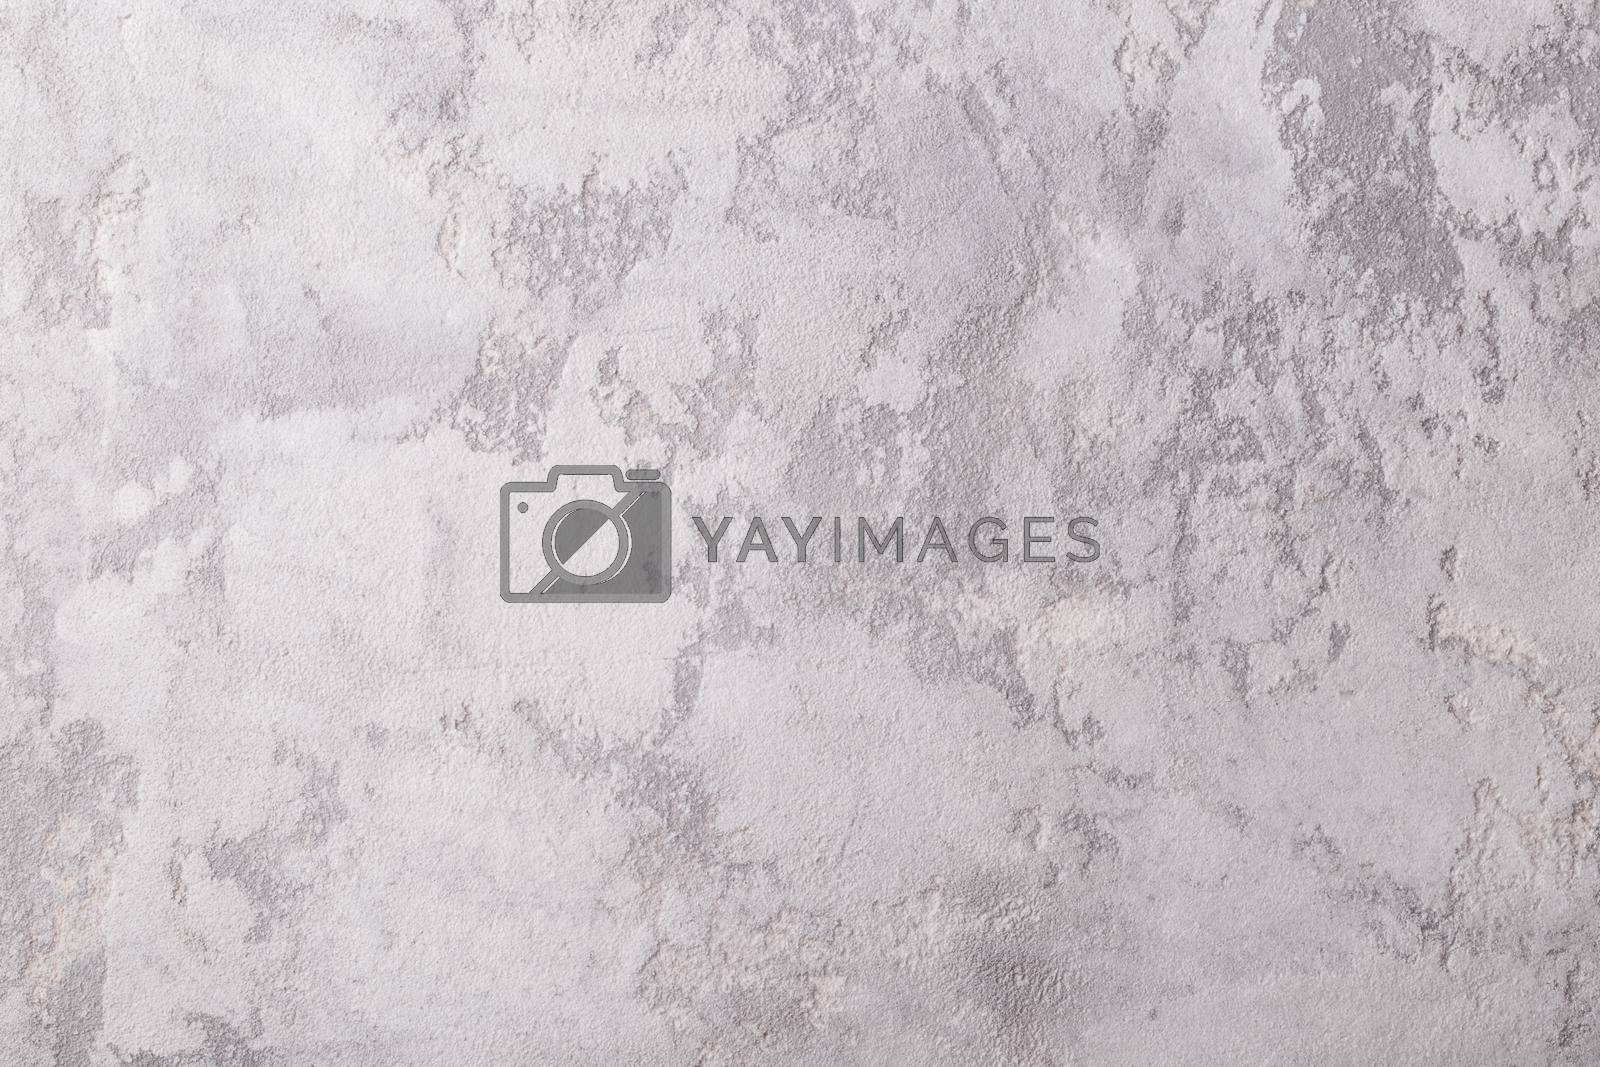 Royalty free image of Grey concrete wall background by Lana_M